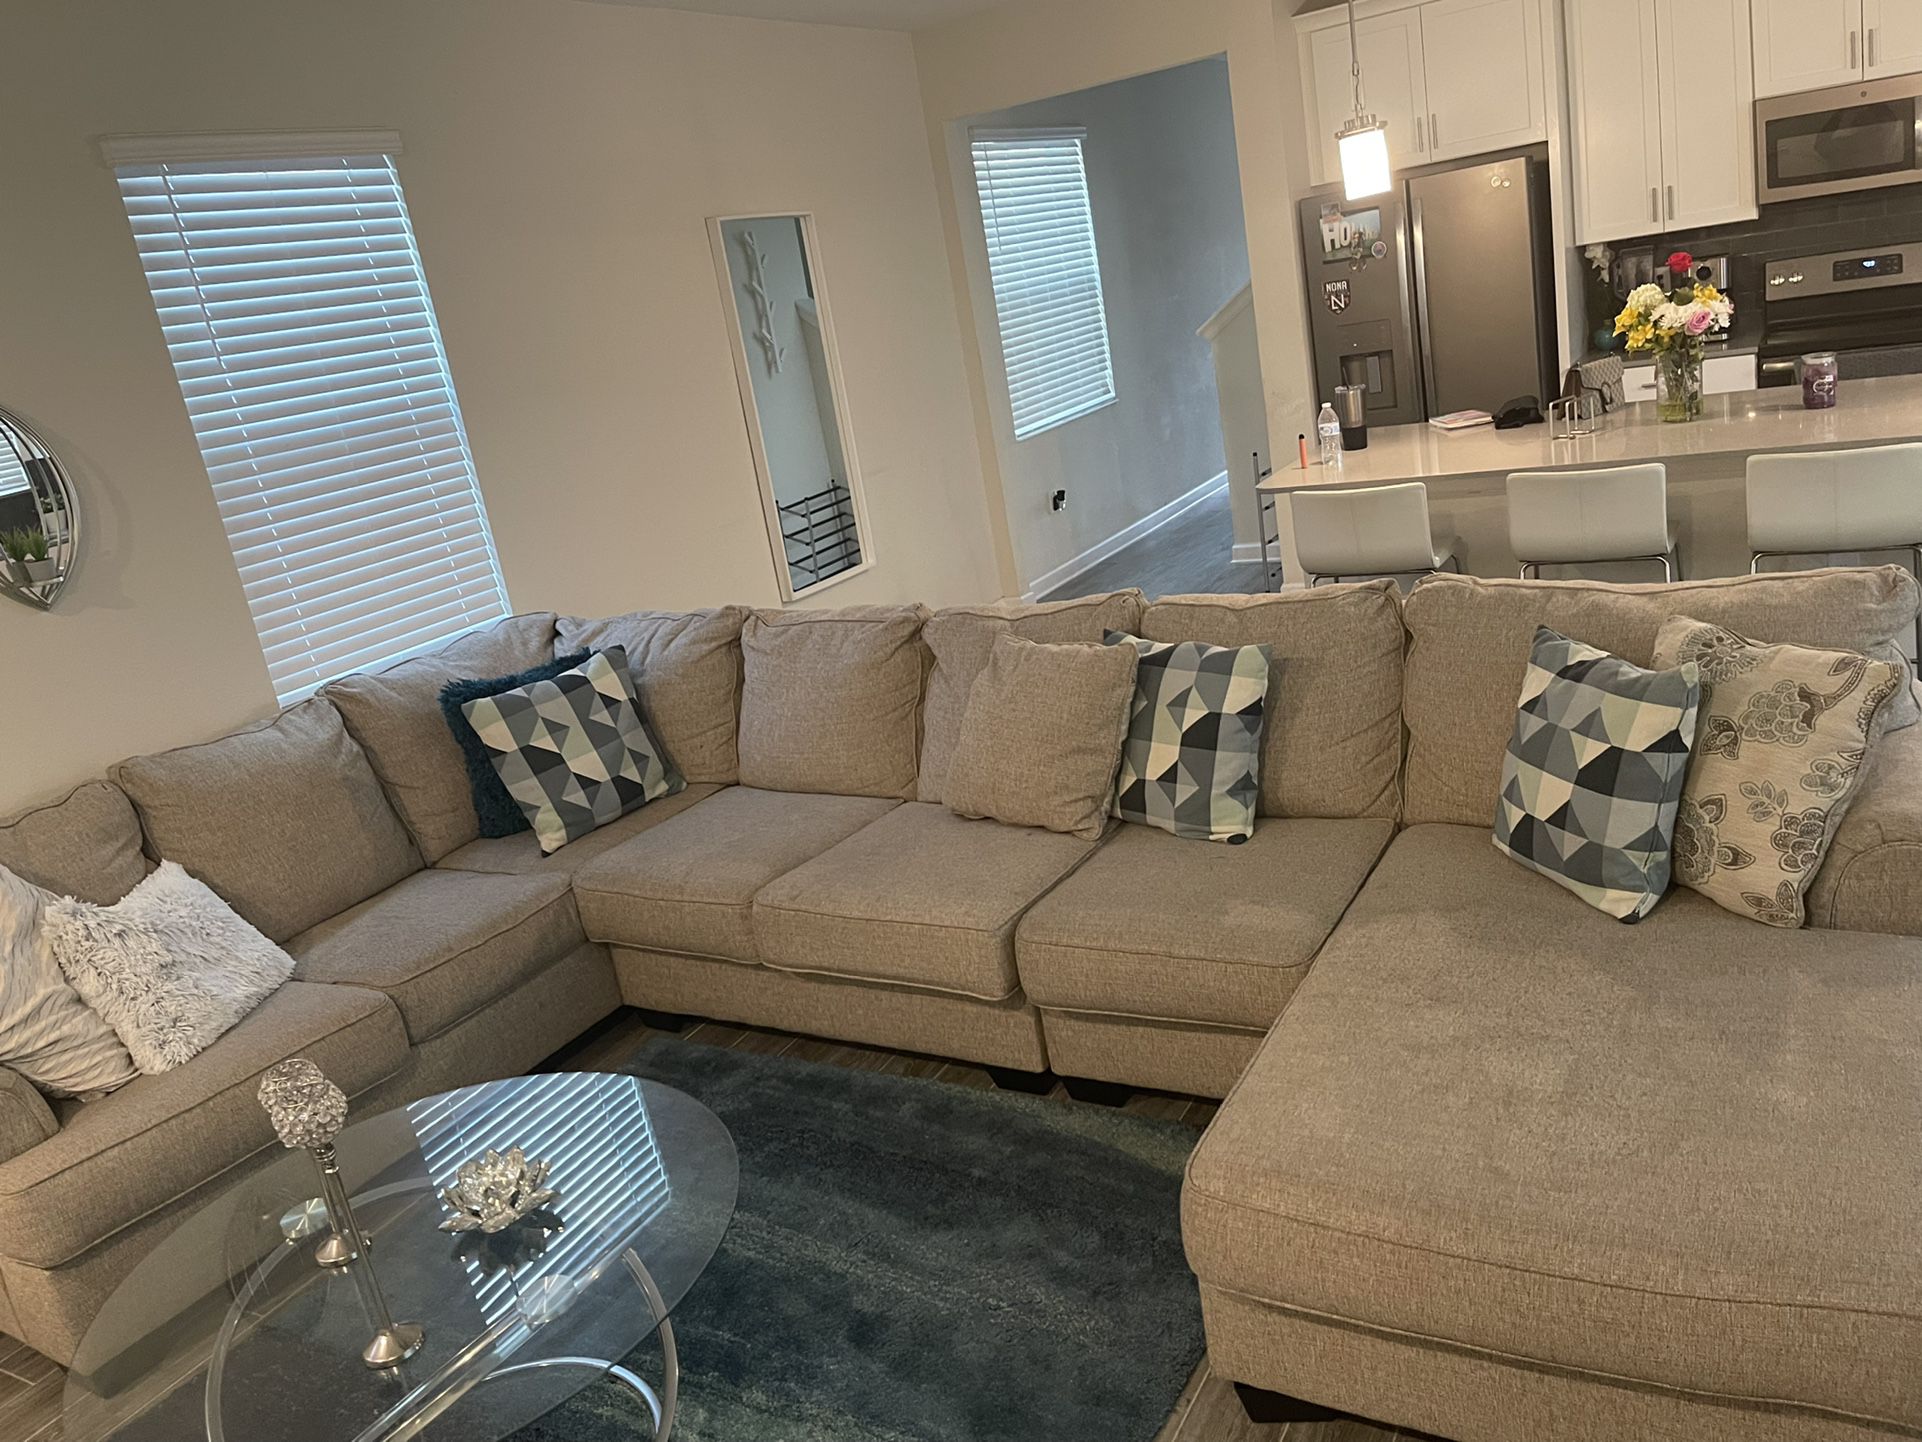 Full Living Room Set - Rooms To Go for Sale in Orlando, FL - OfferUp